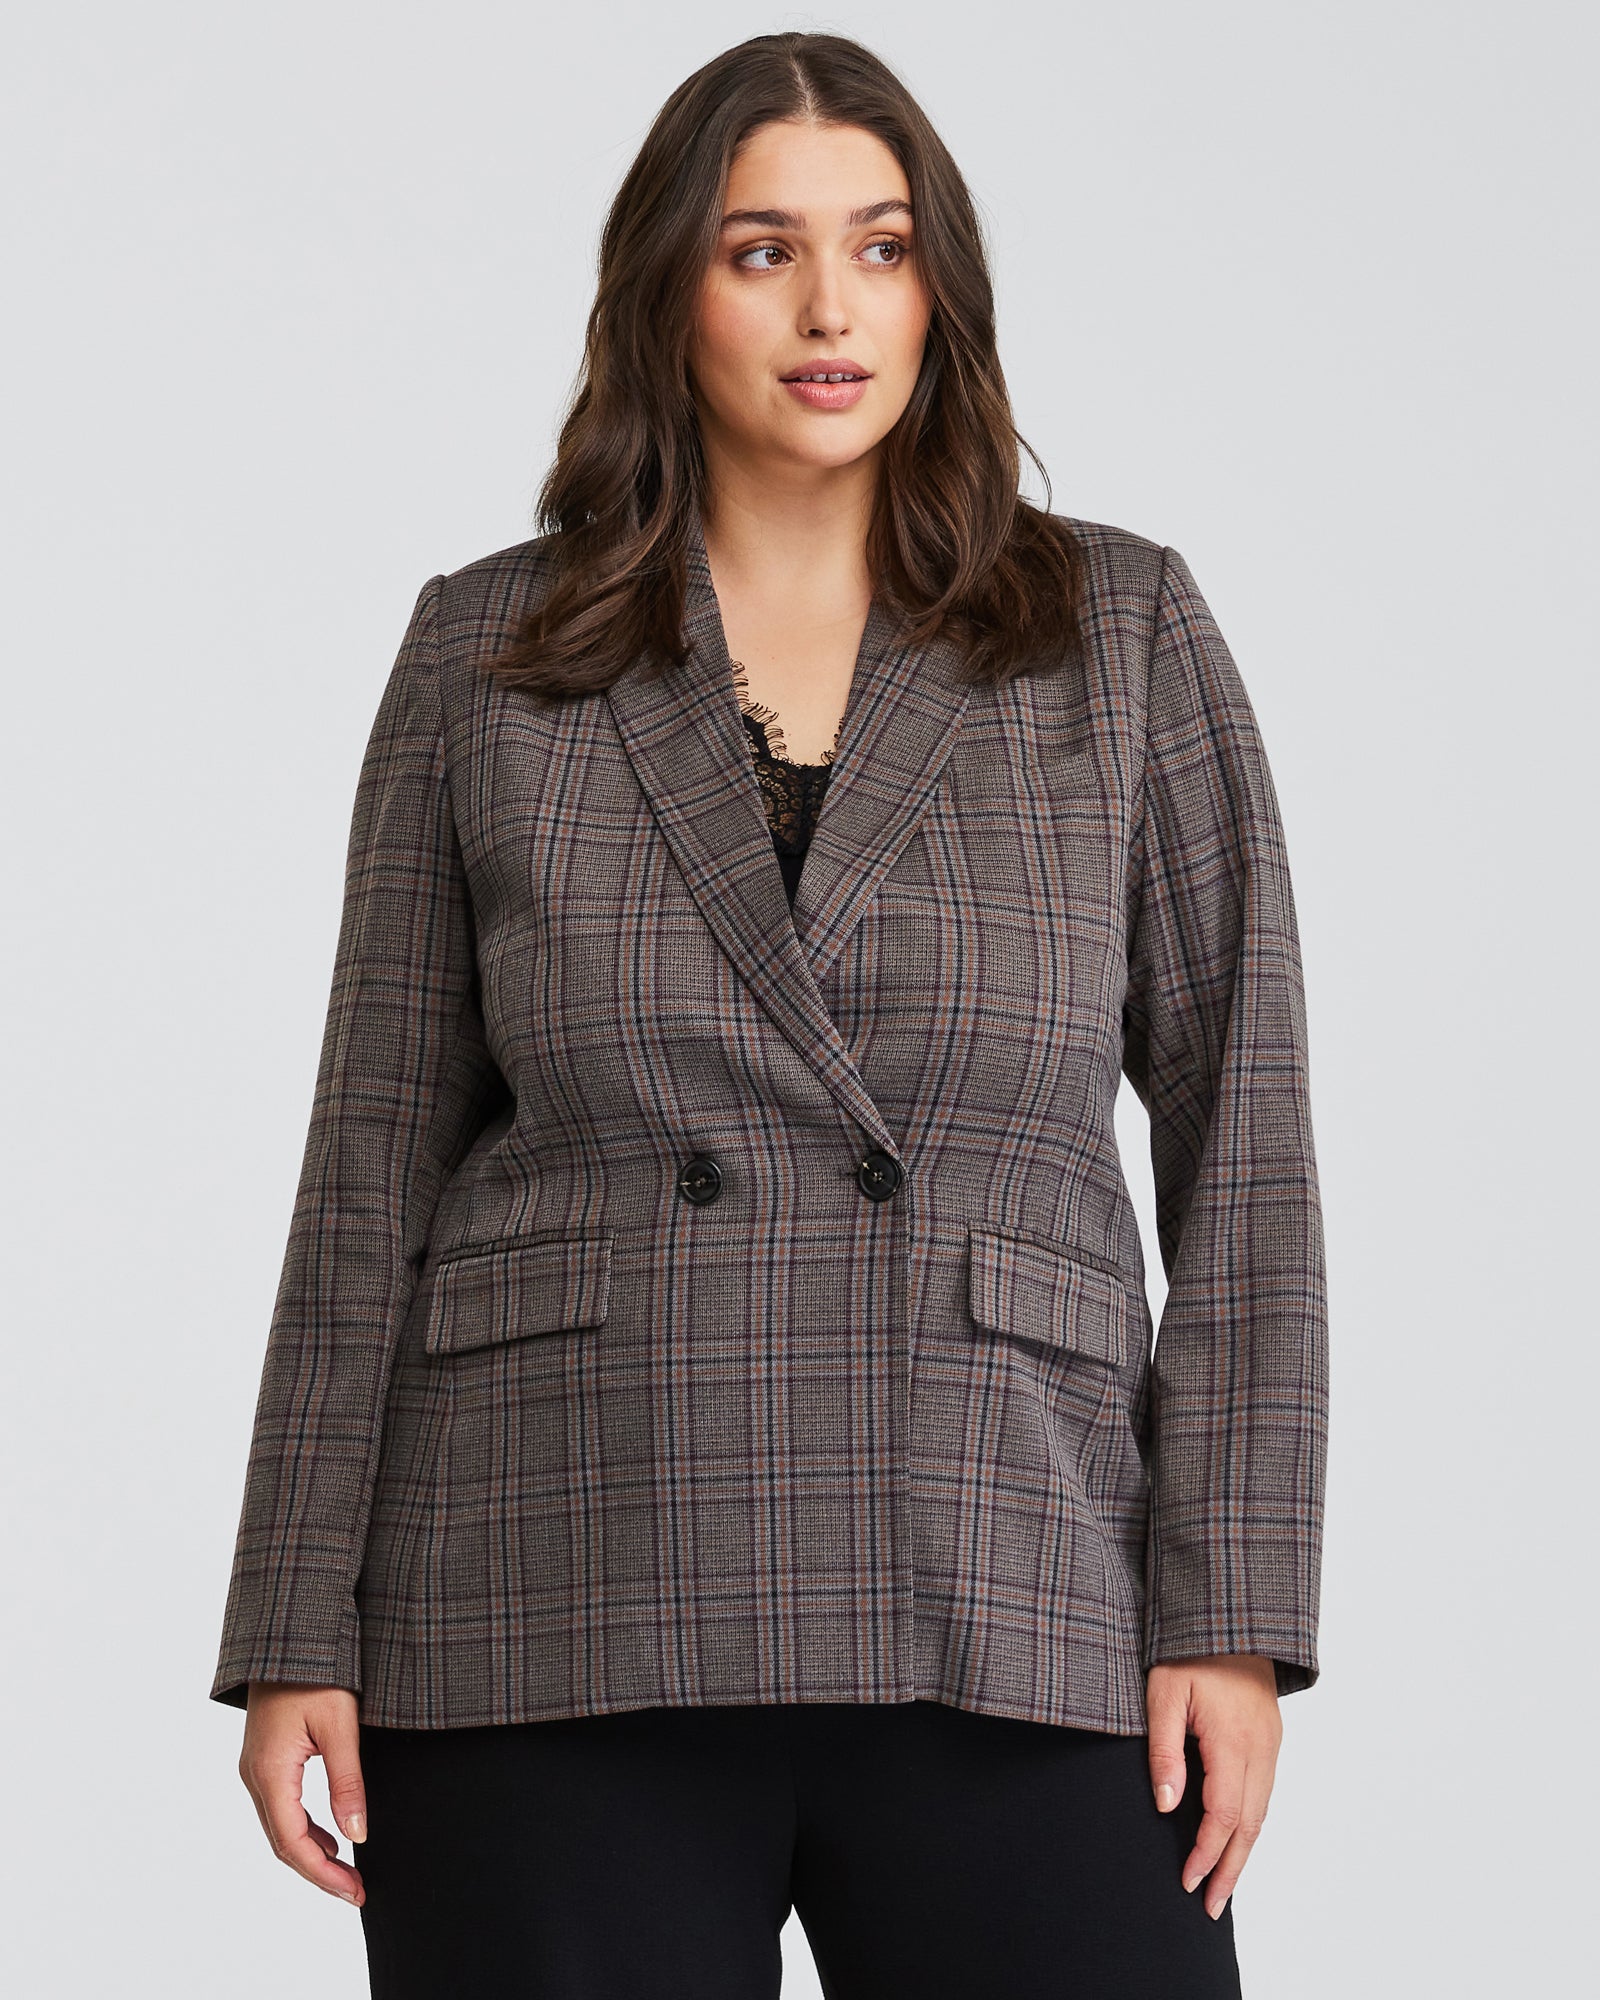 A plus-sized woman wearing a Lilibet Brown Check Double-Breasted Blazer.